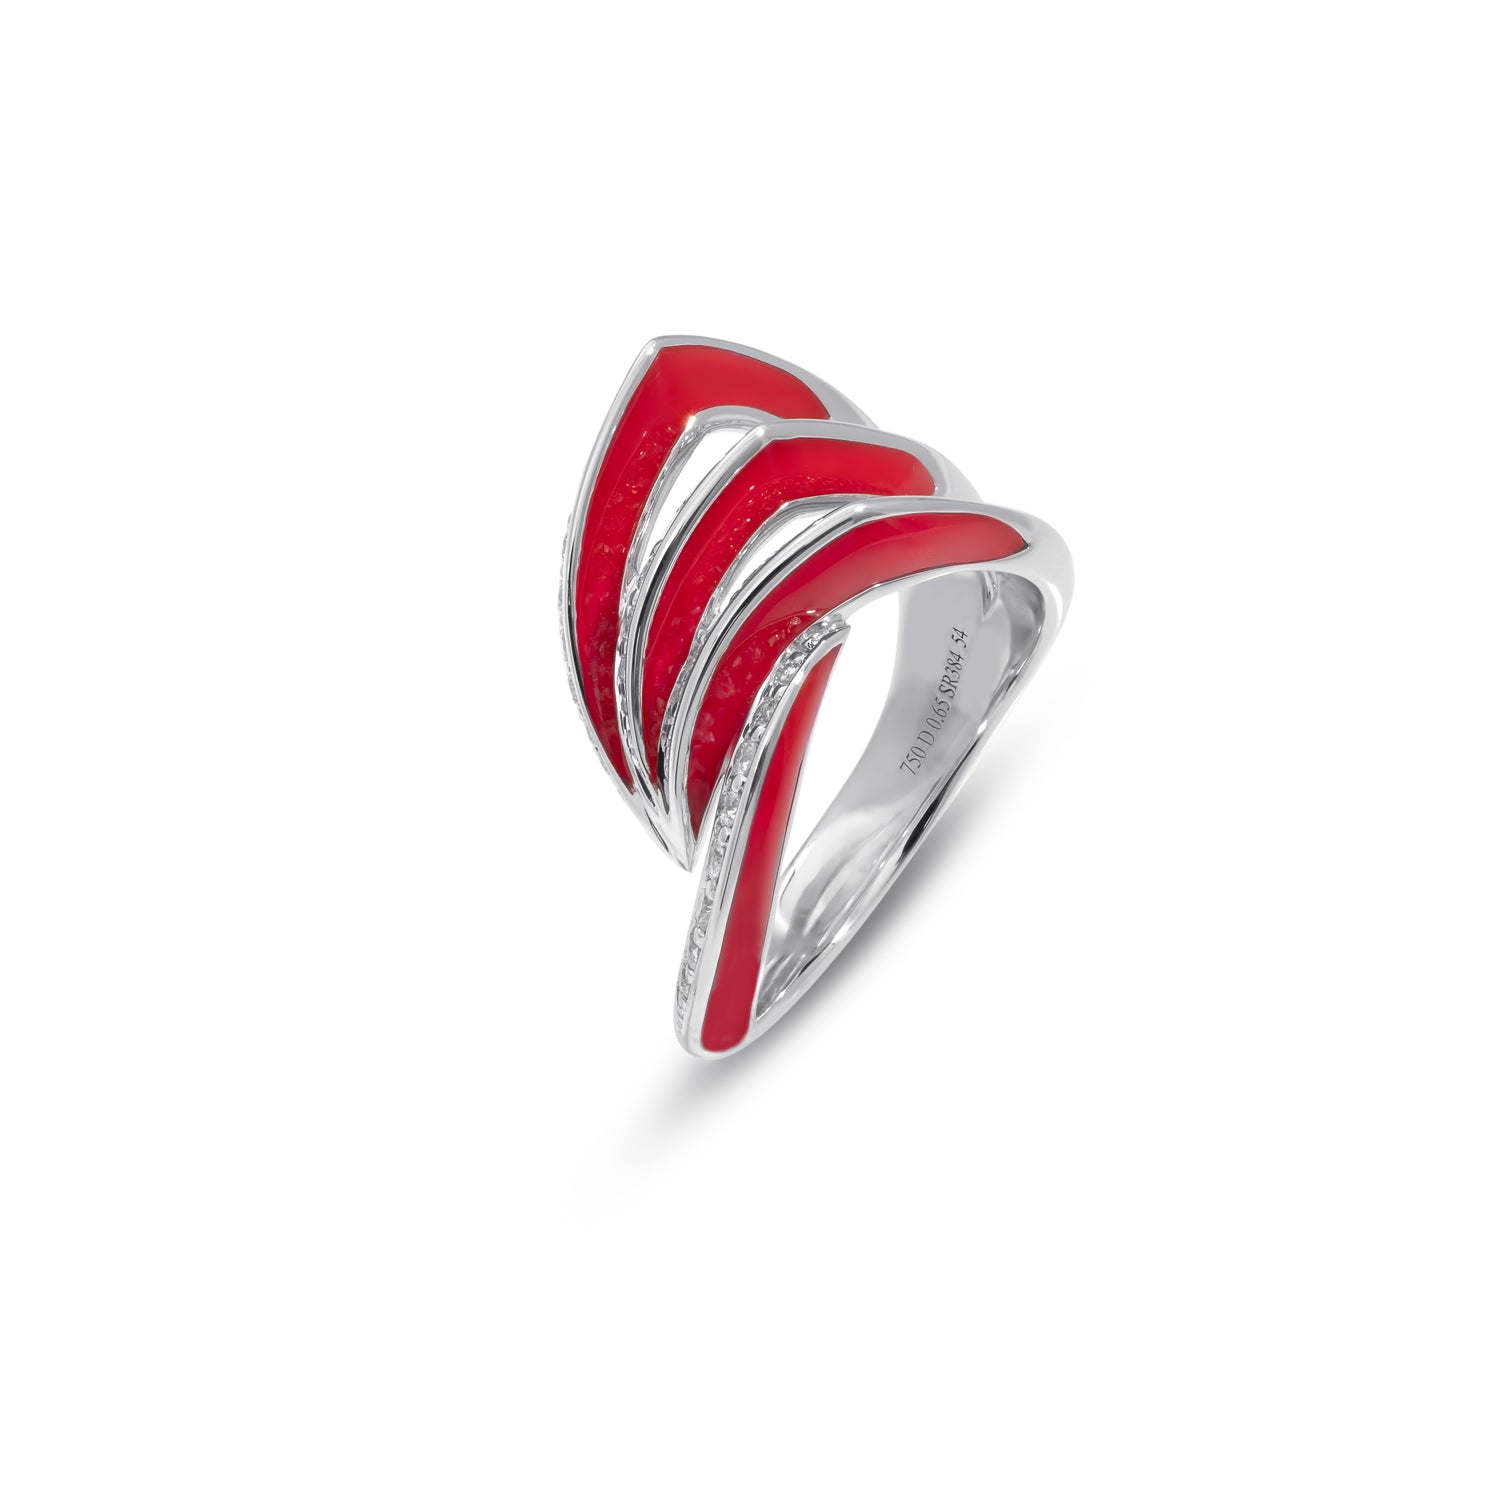 VIVA Ring with Diamonds and Red Enamel